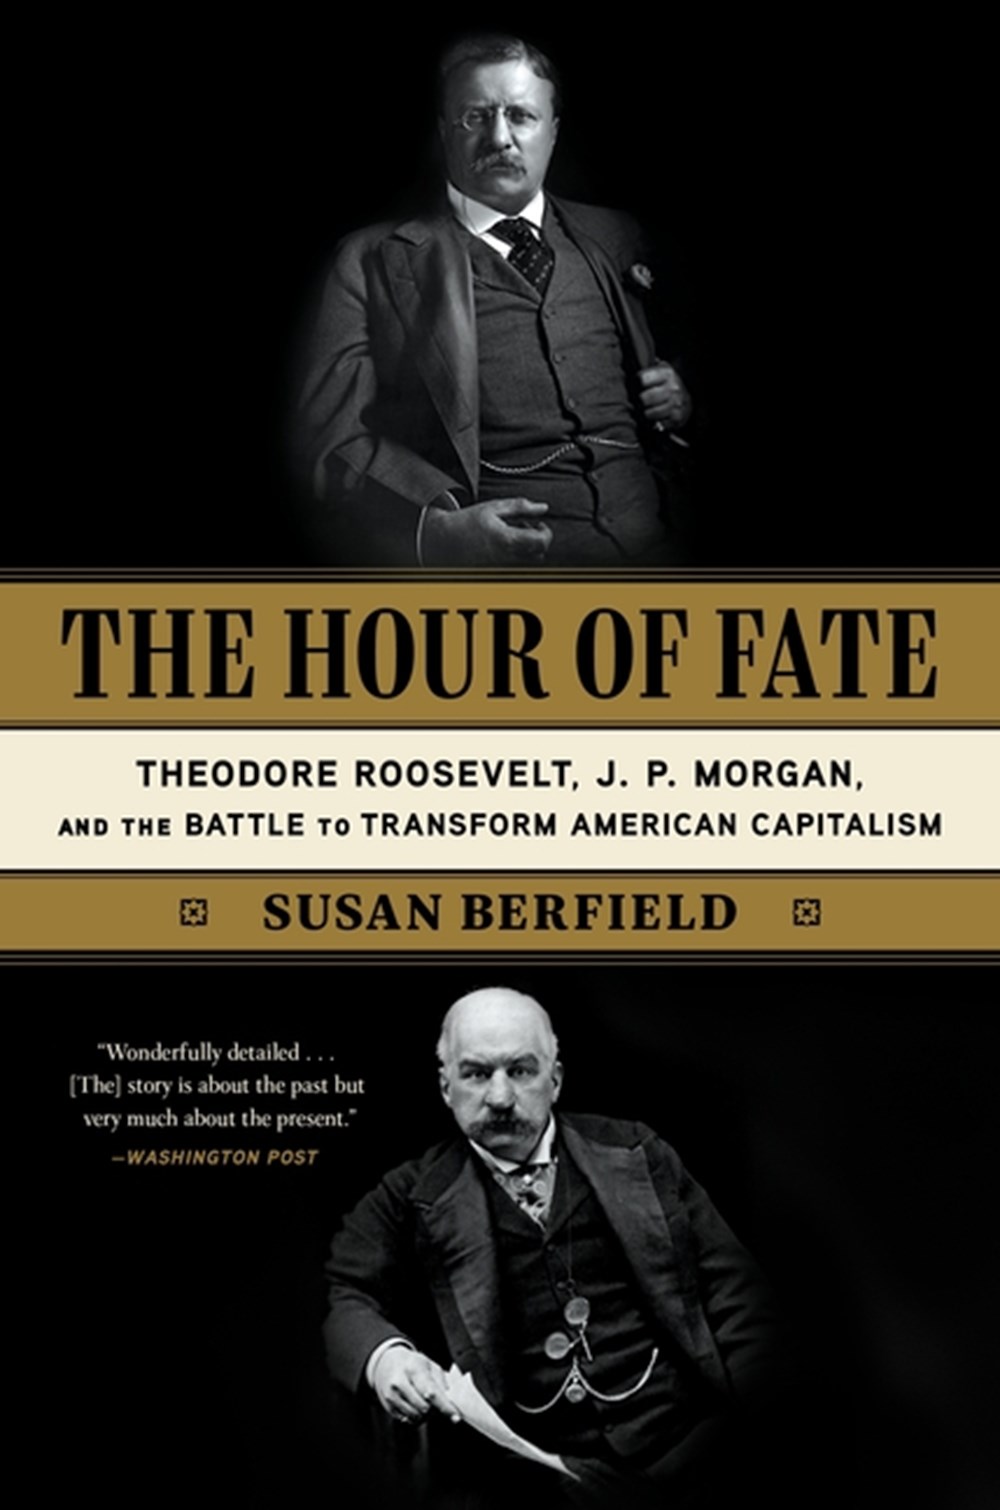 Hour of Fate: Theodore Roosevelt, J.P. Morgan, and the Battle to Transform American Capitalism